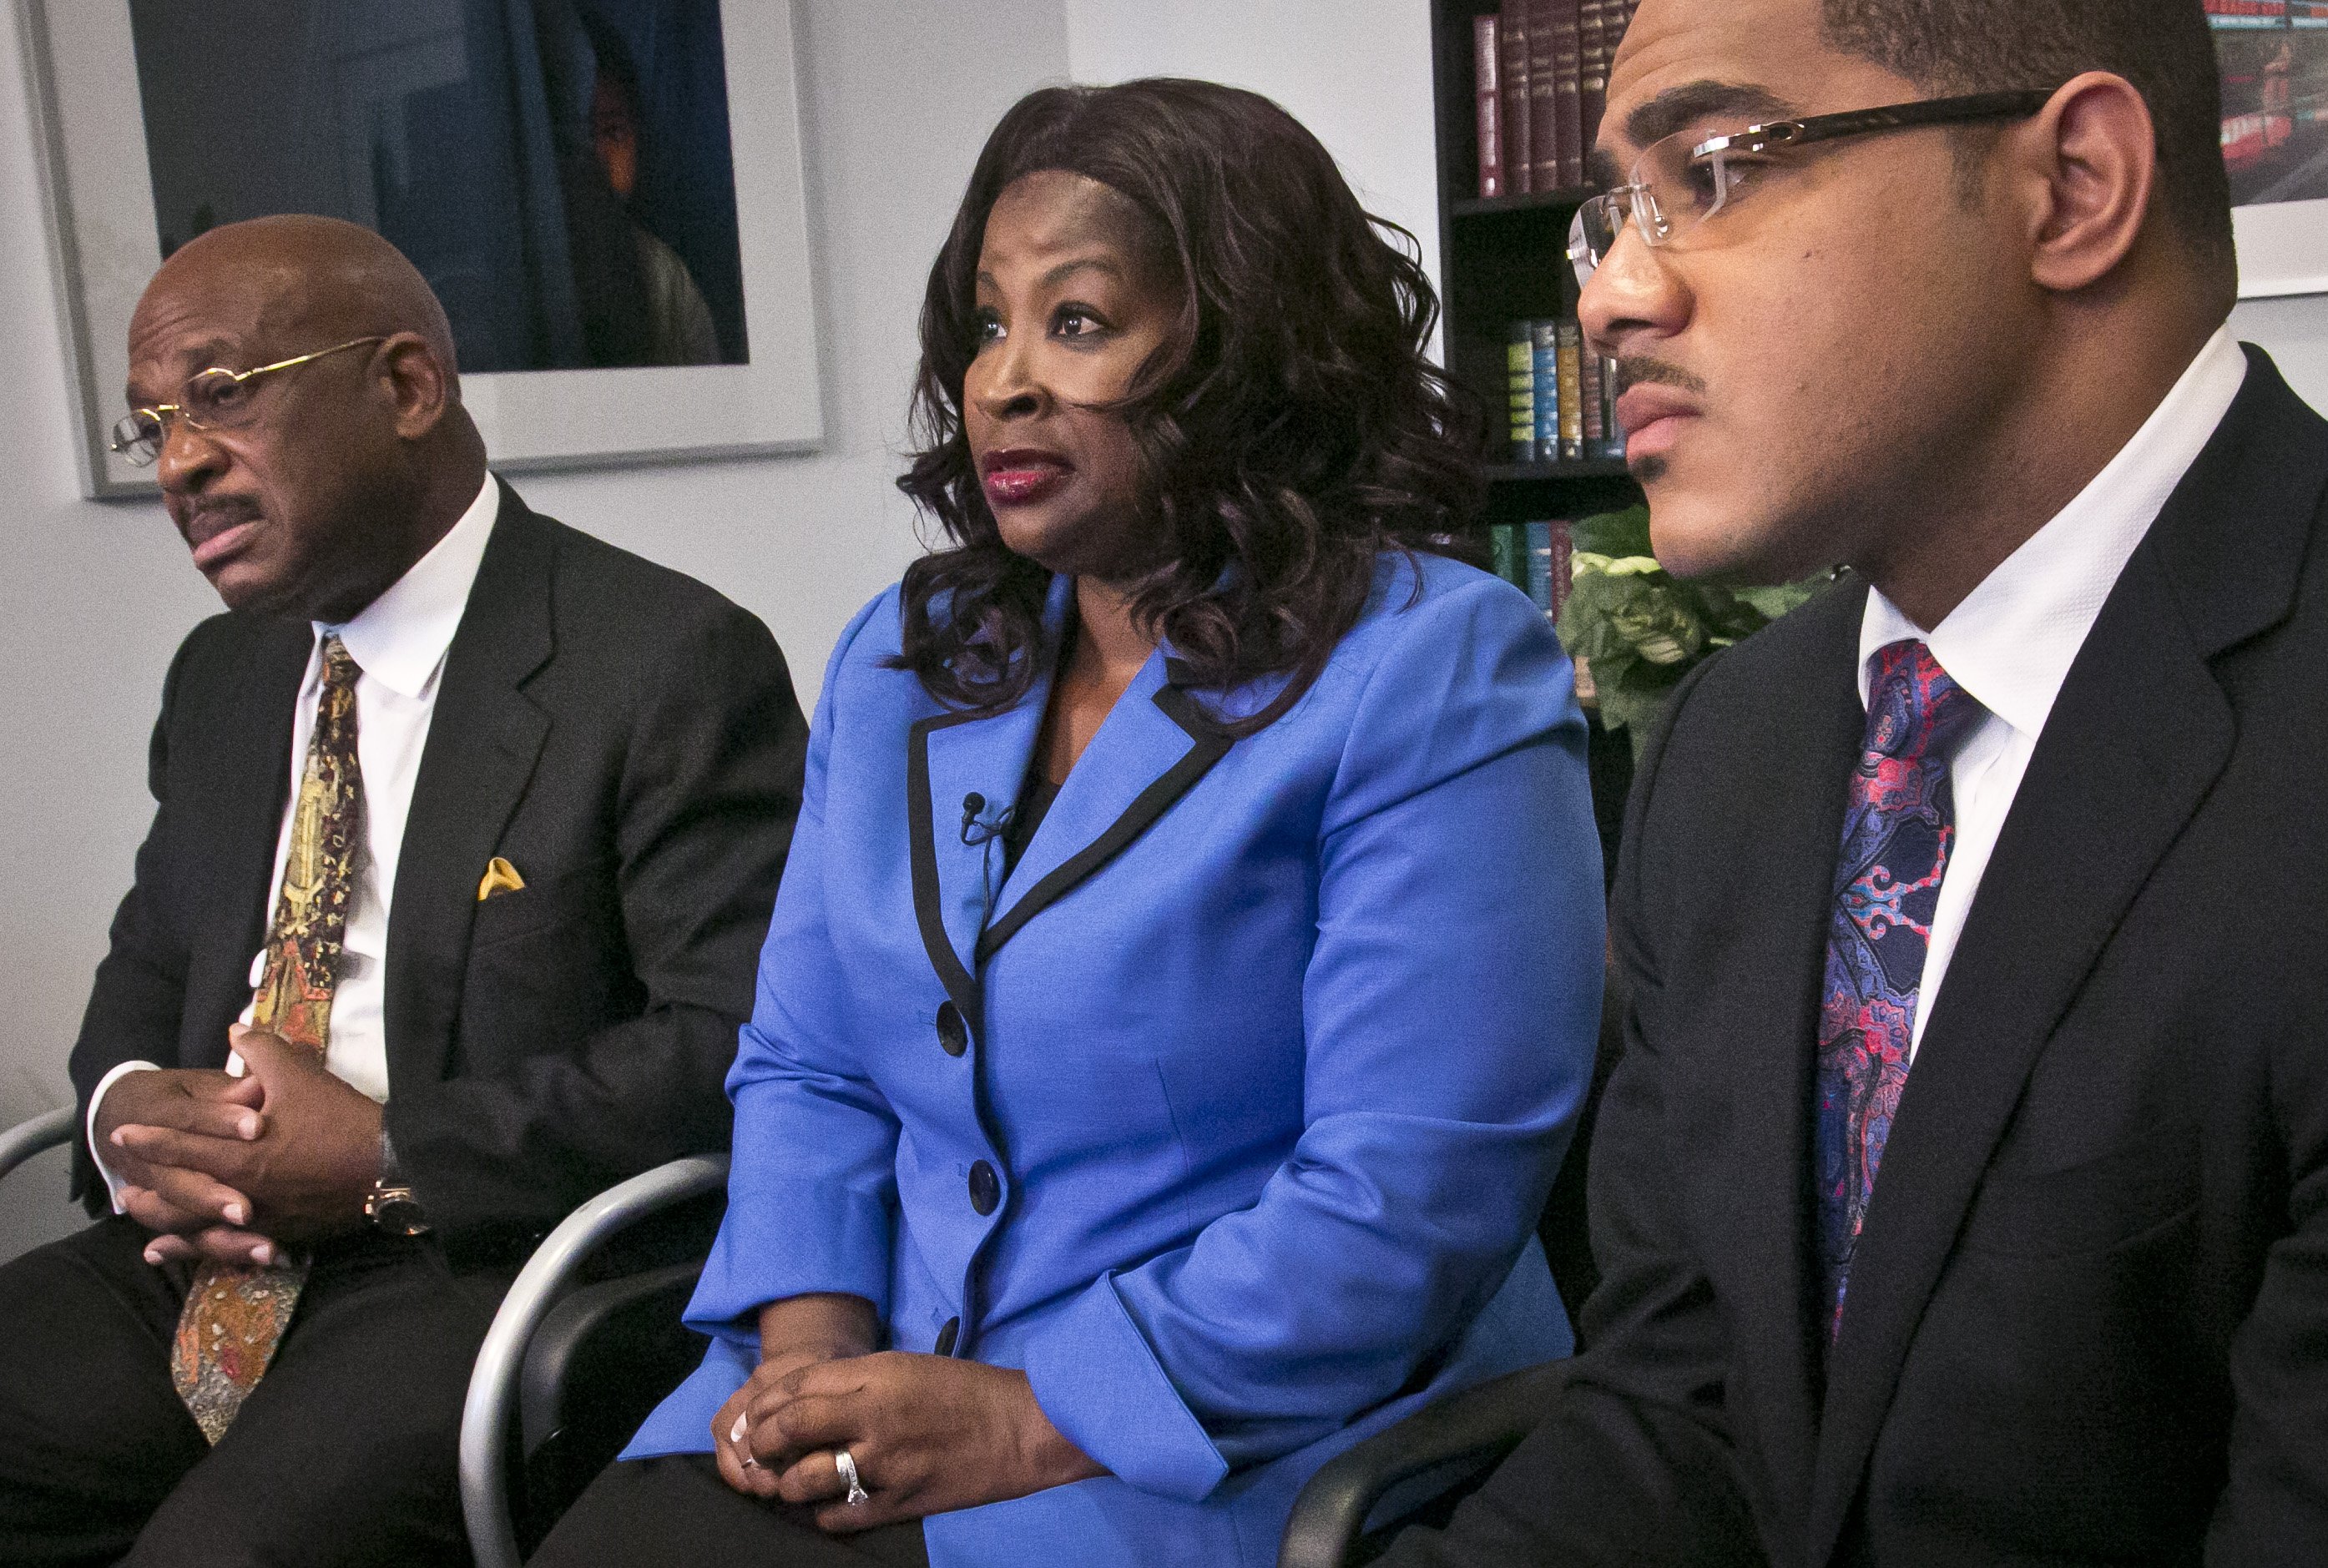 Cynthia Robinson with her attorneys Willie Gary (left) and Christopher Chestnut (right) as she speaks during an interview on July 21, 2014 in New York City. (Bebeto Matthews—AP)